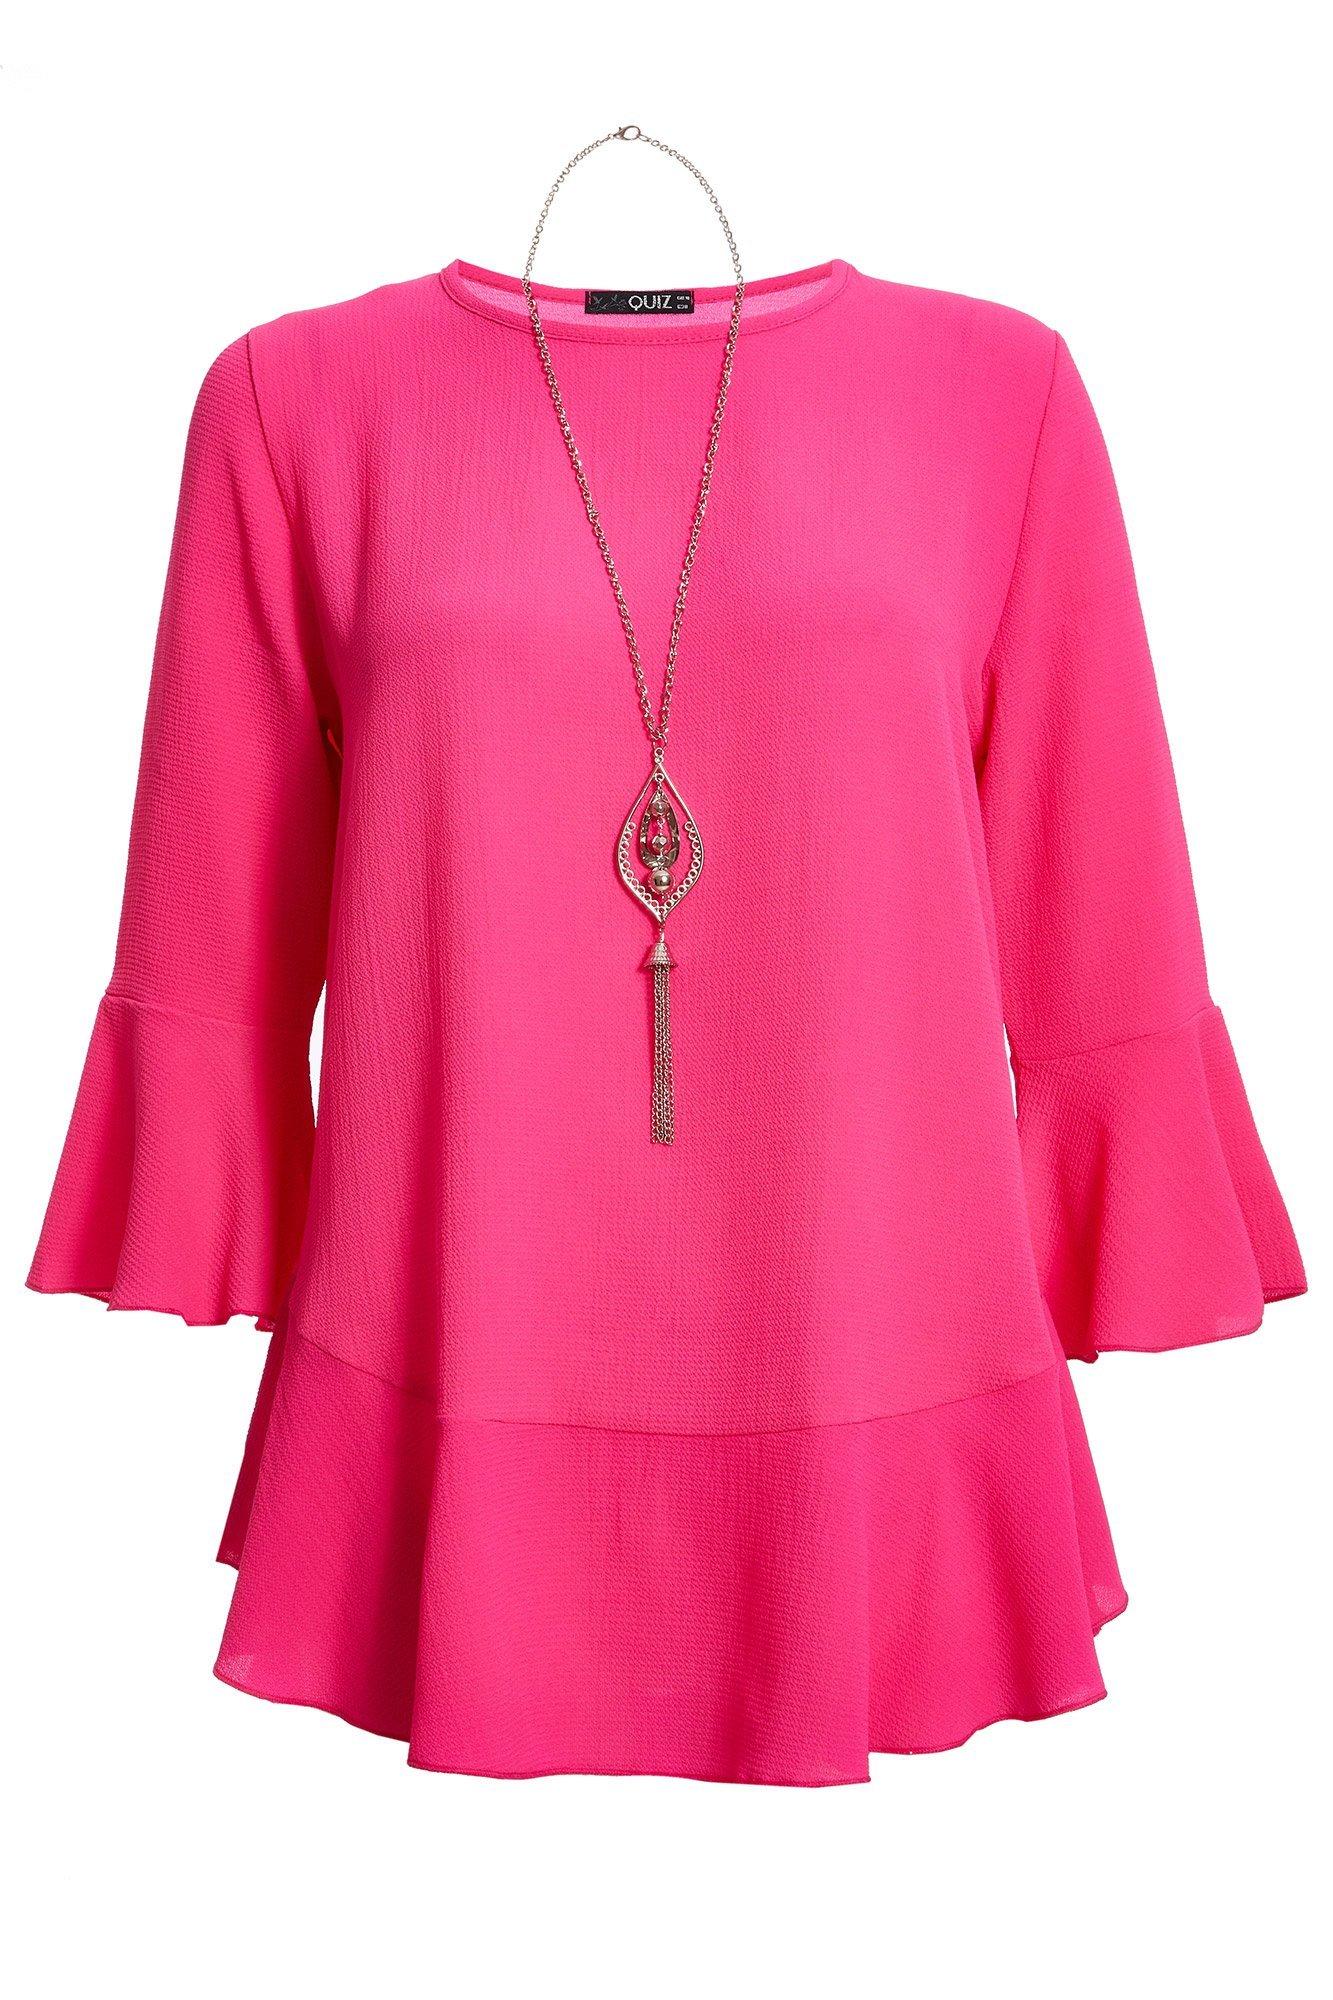 Pink 3/4 Sleeve Frill Hem Necklace Top - Quiz Clothing